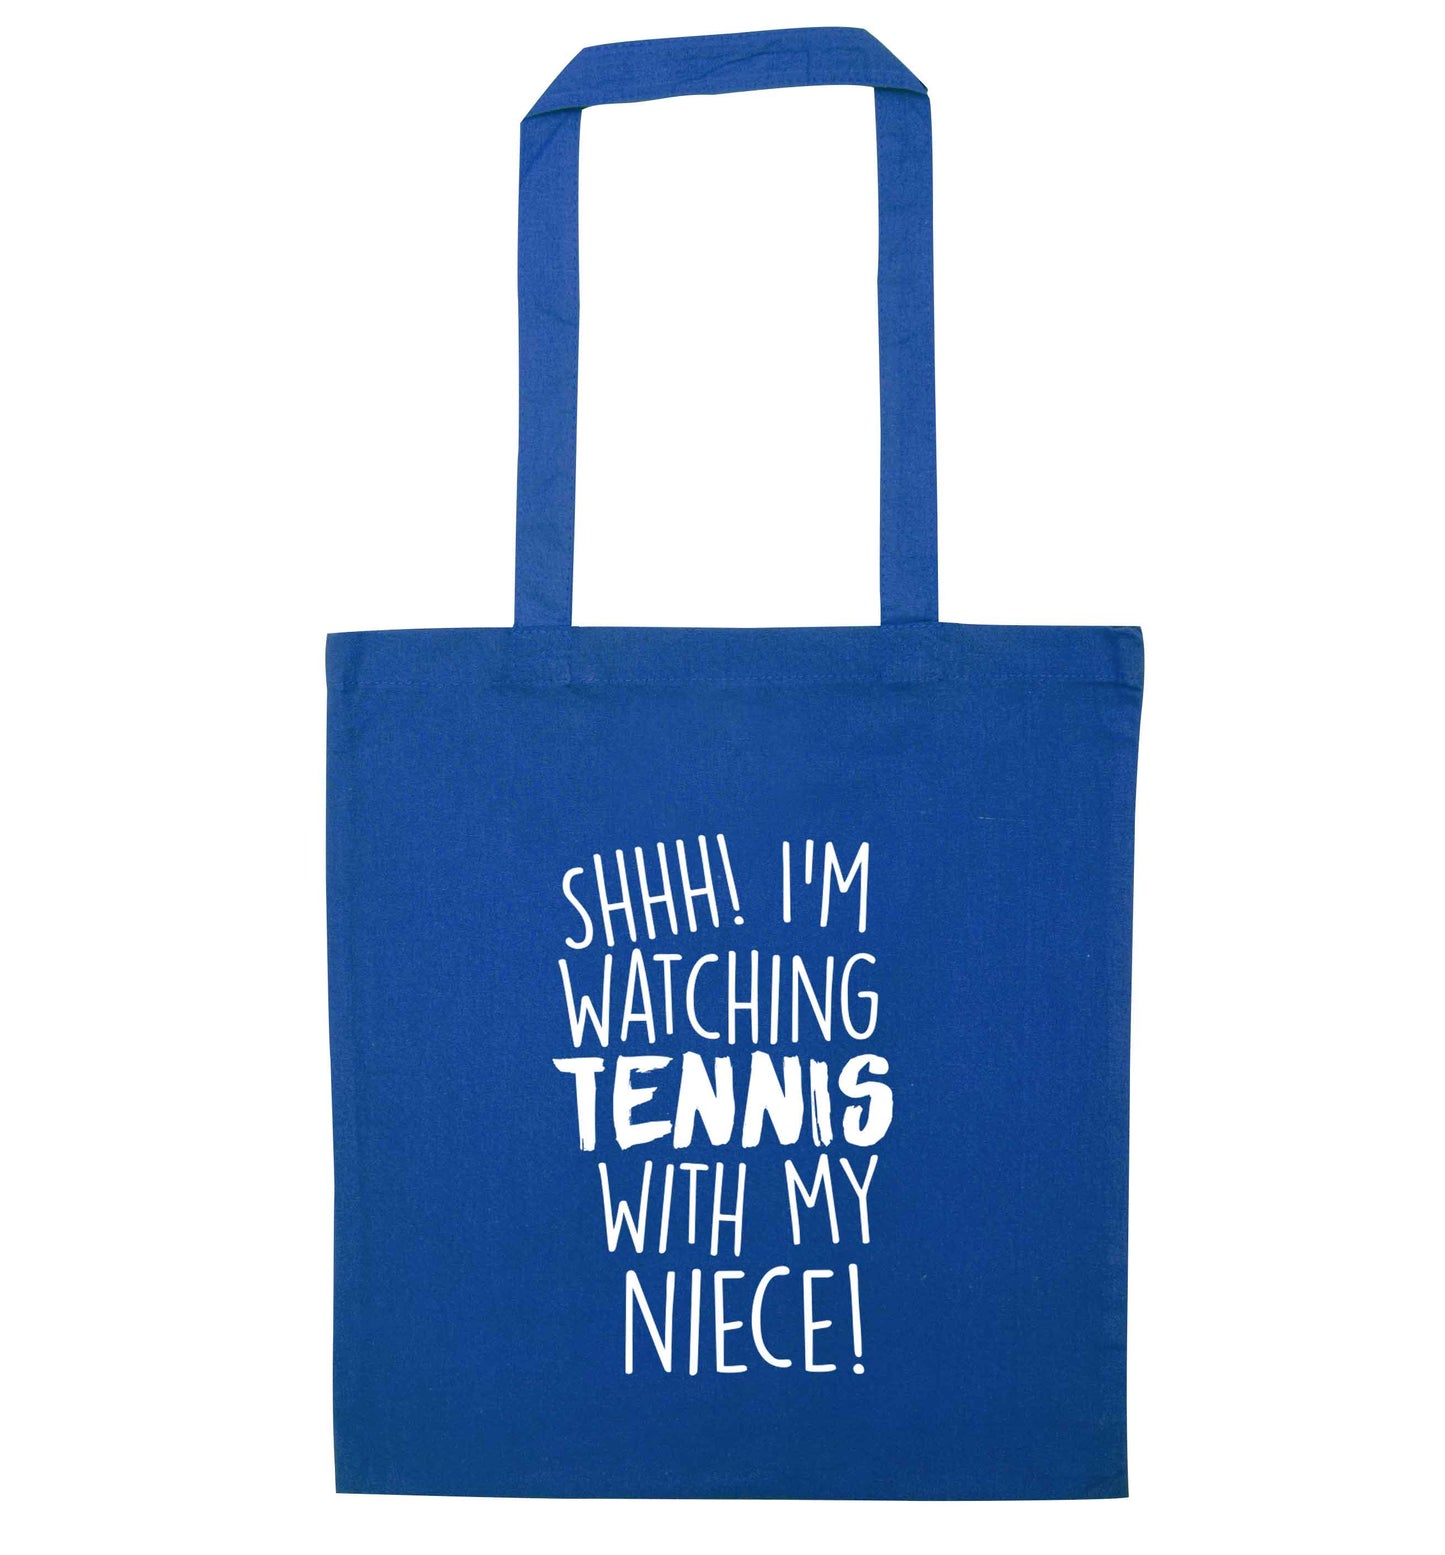 Shh! I'm watching tennis with my niece! blue tote bag